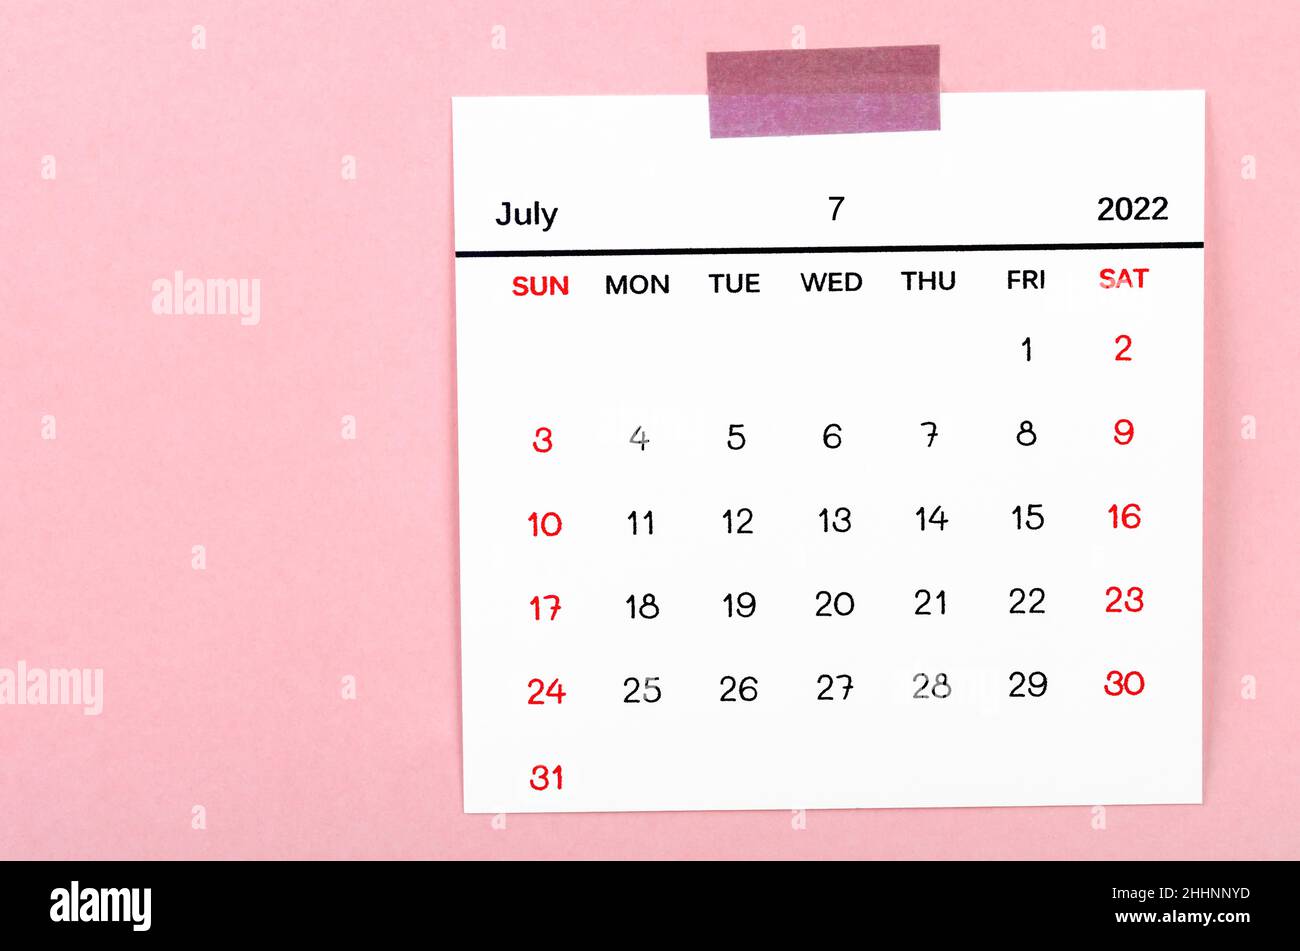 The July 2022 calendar on pink background. Stock Photo